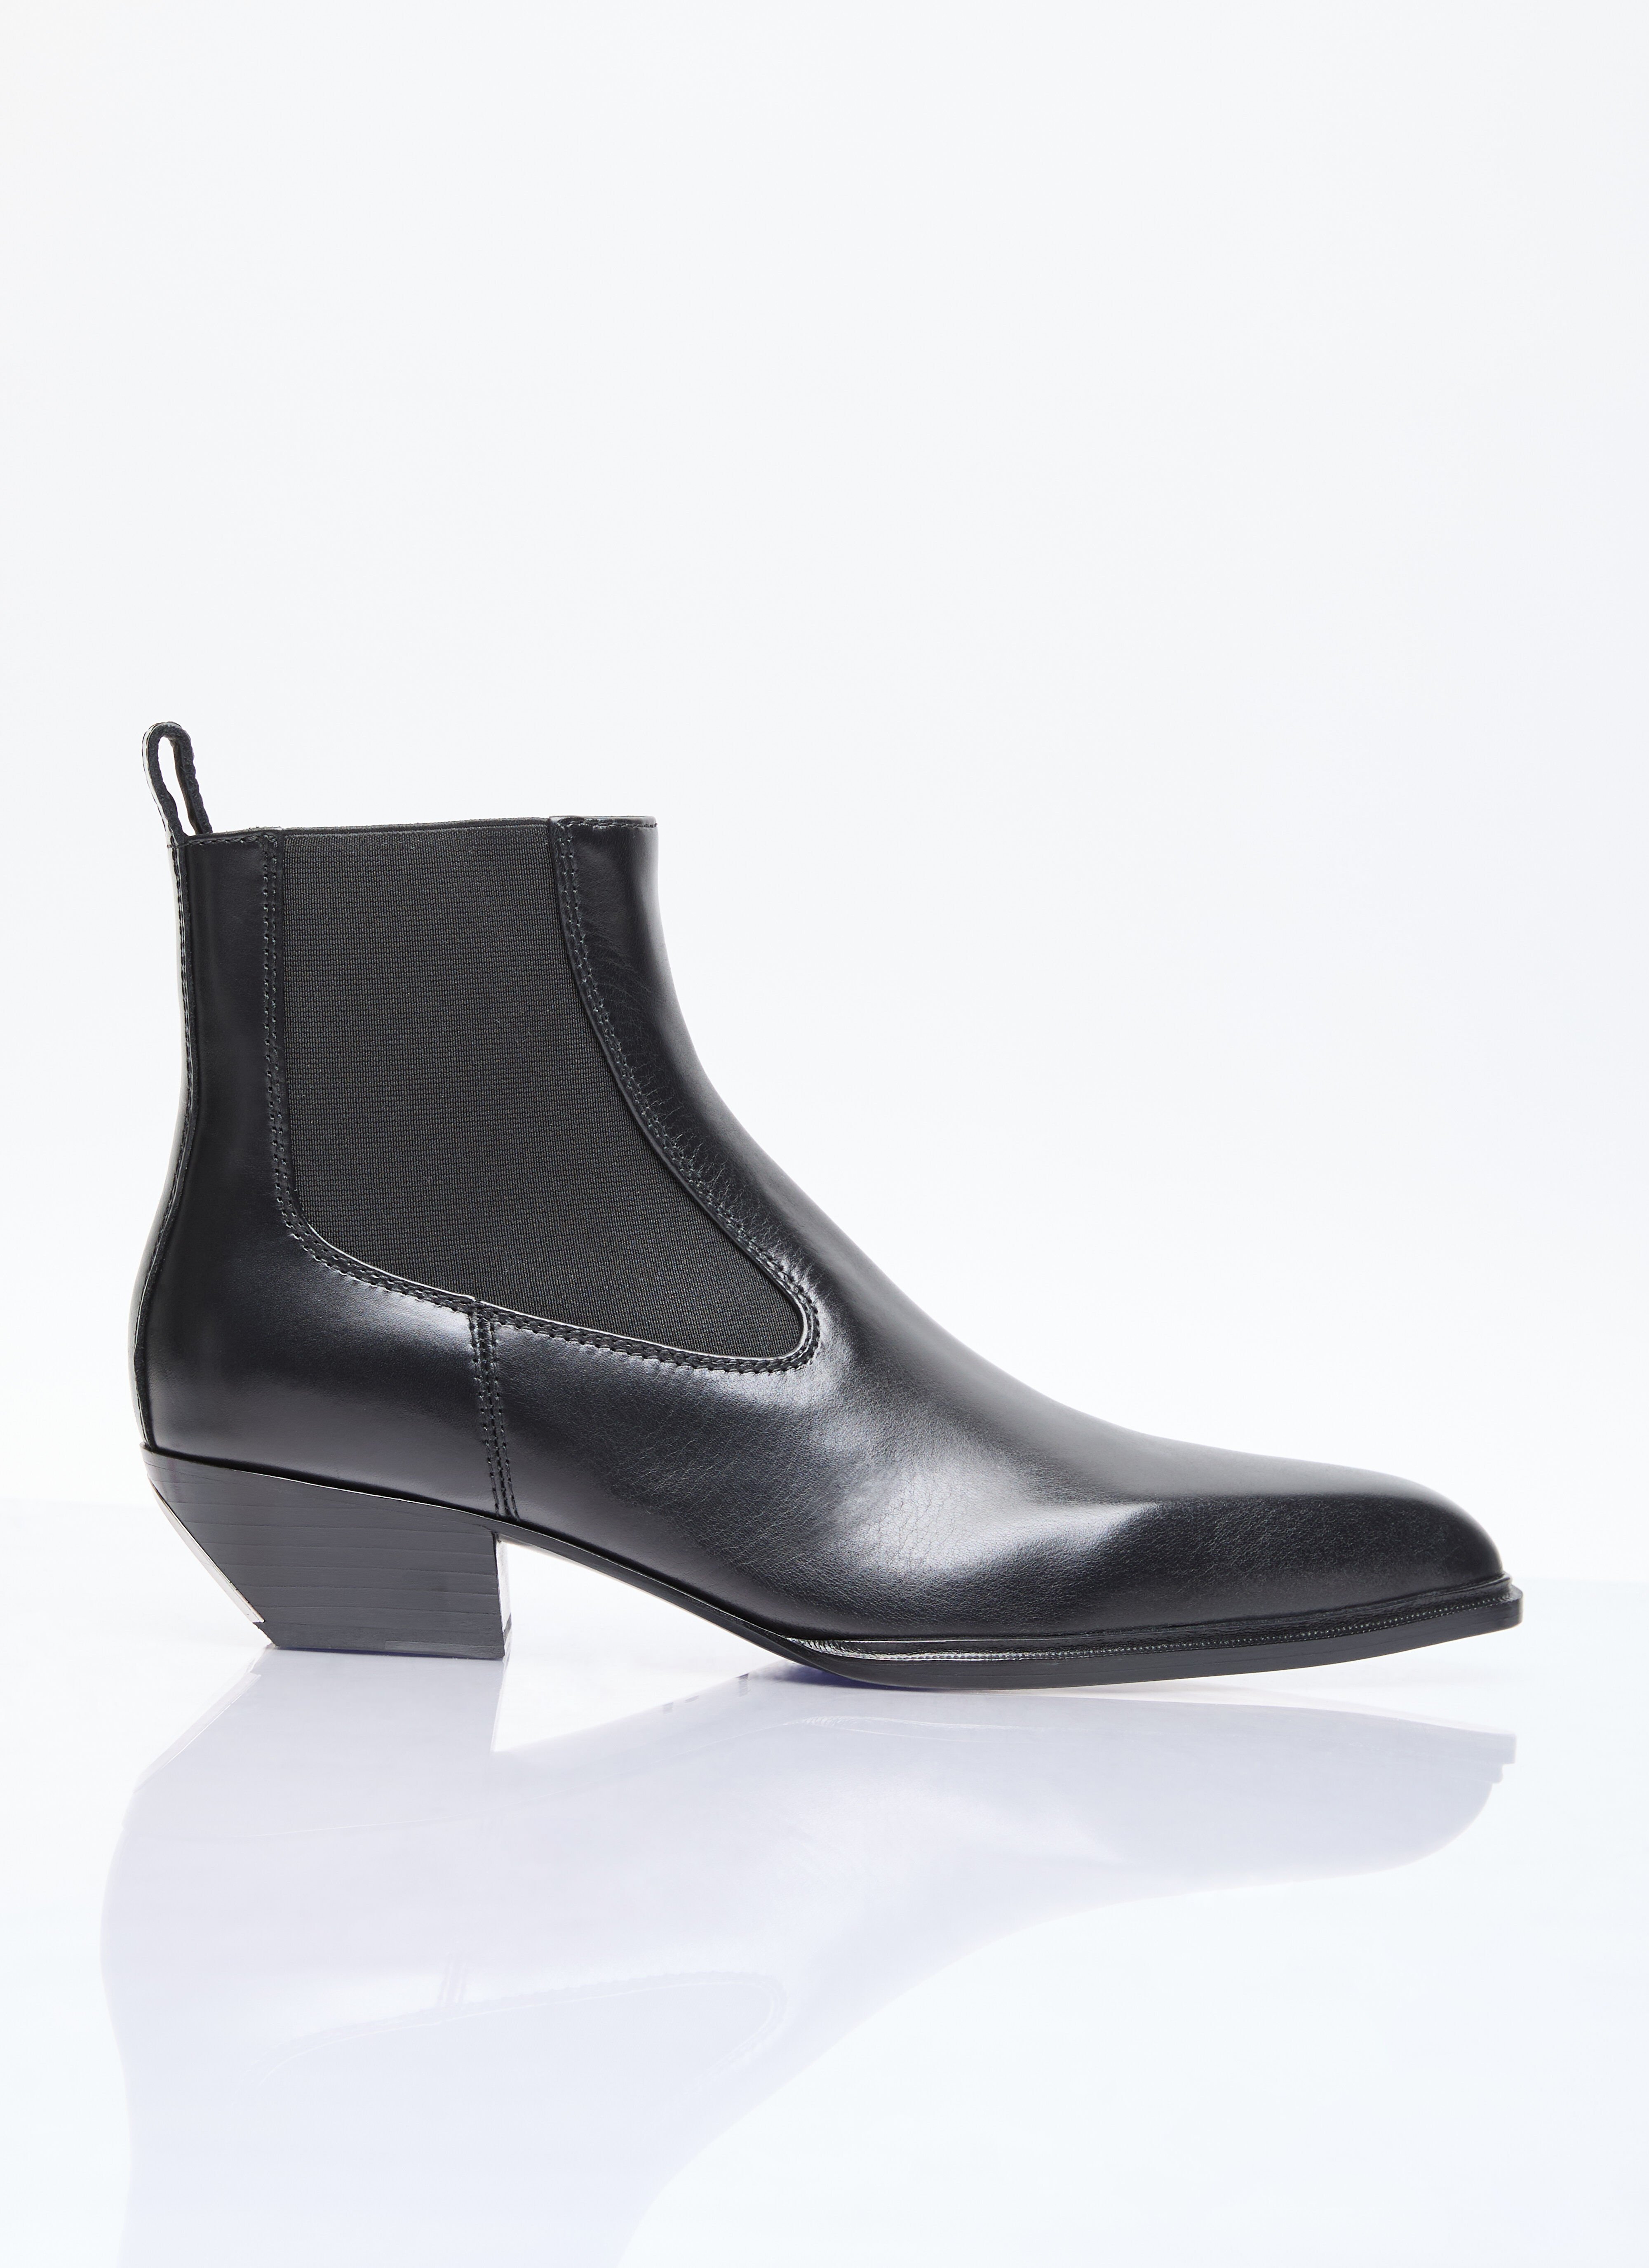 Alexander Wang Slick 40 Ankle Boots Black awg0253017